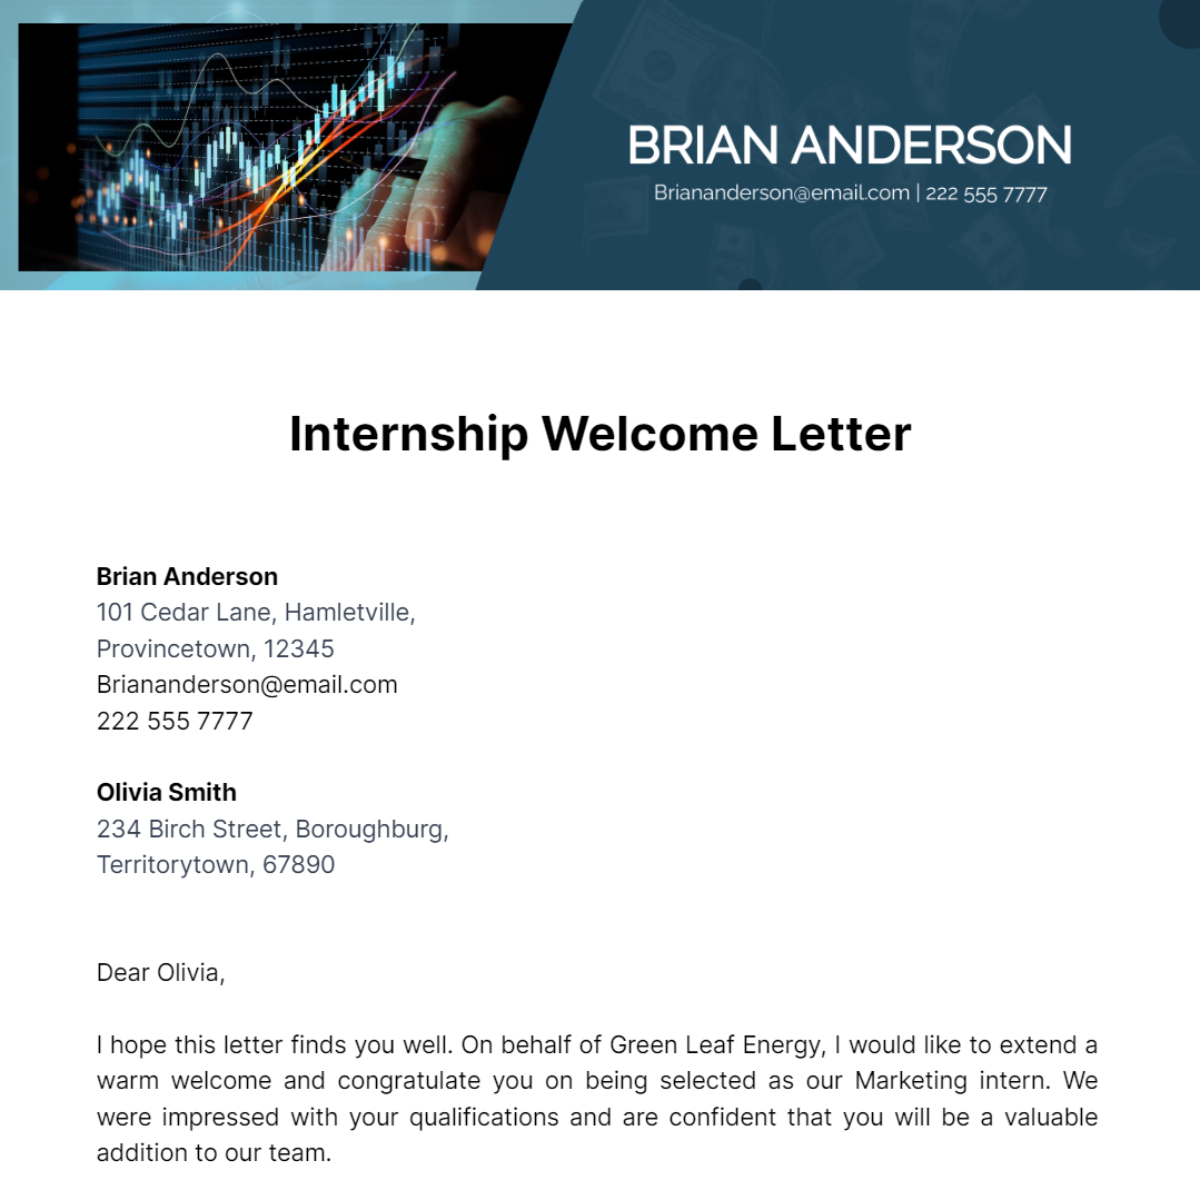 Internship Welcome Letter Template